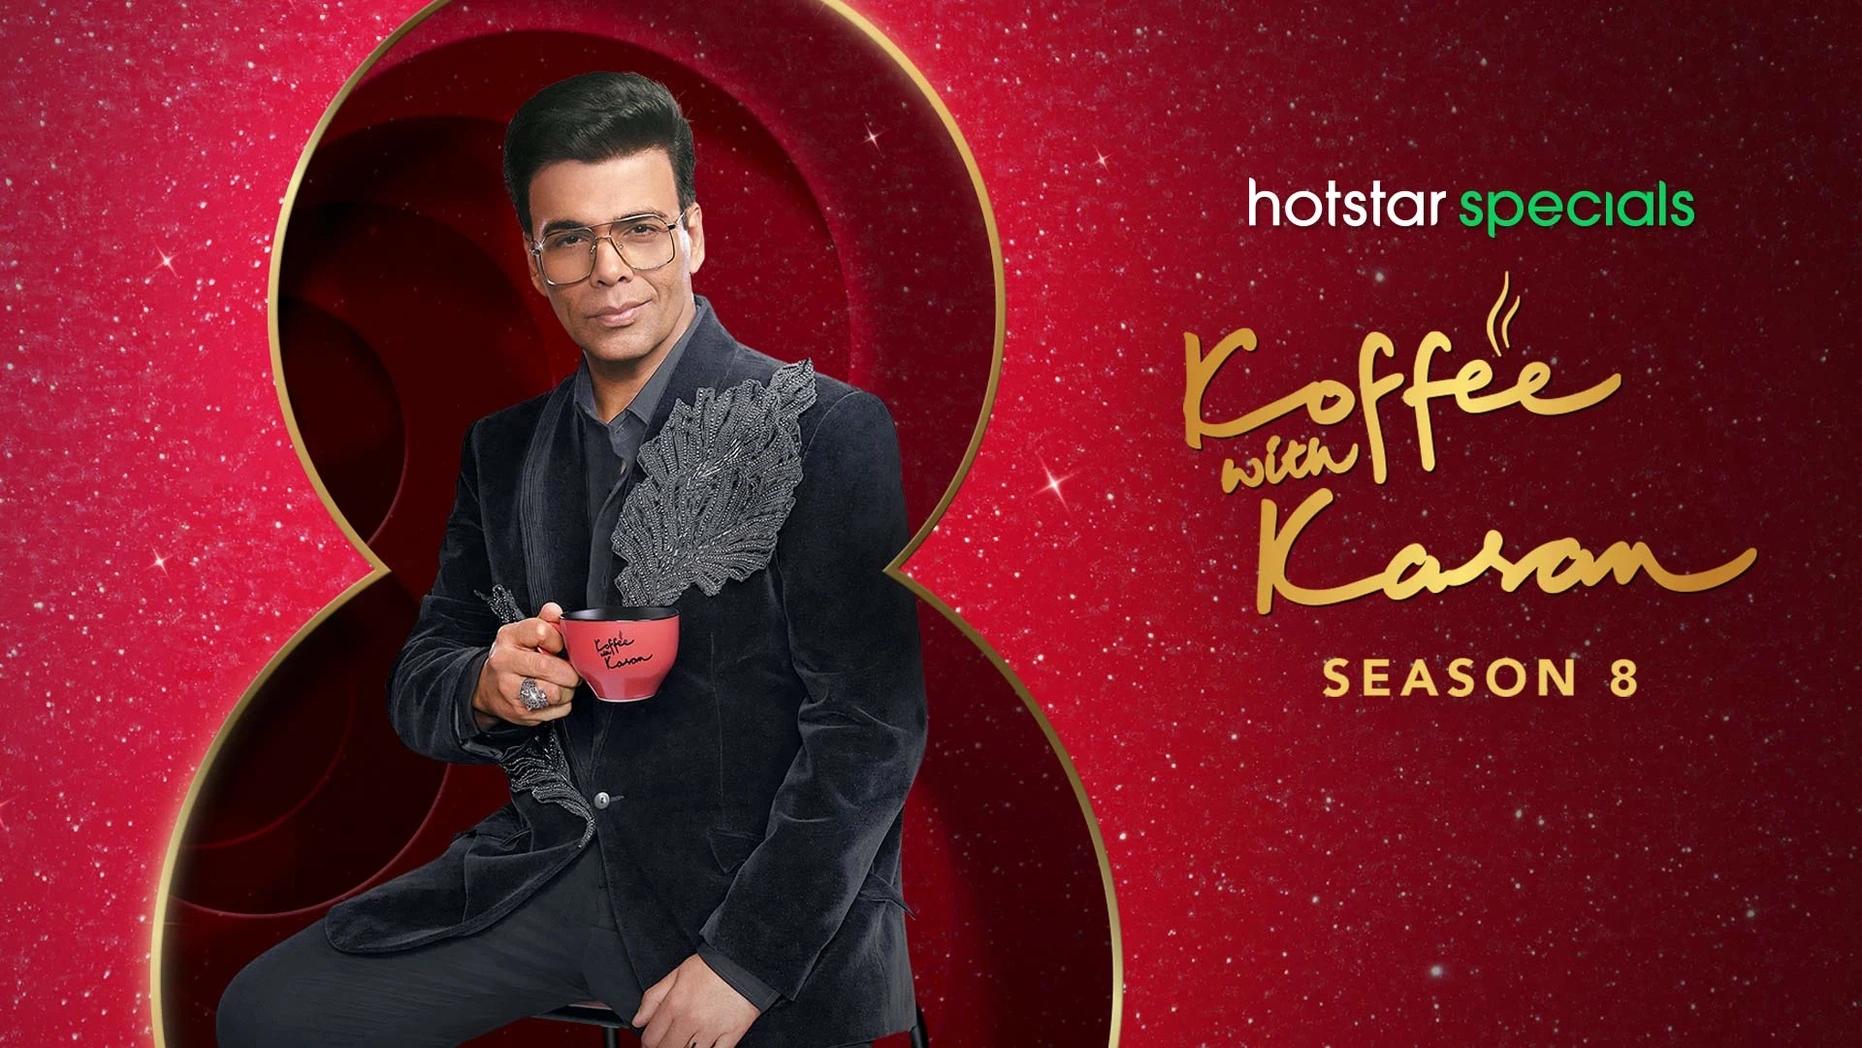 Koffee with Karan Season 8-Neetu Kapoor and Zeena Aman is the next guest to the couch!